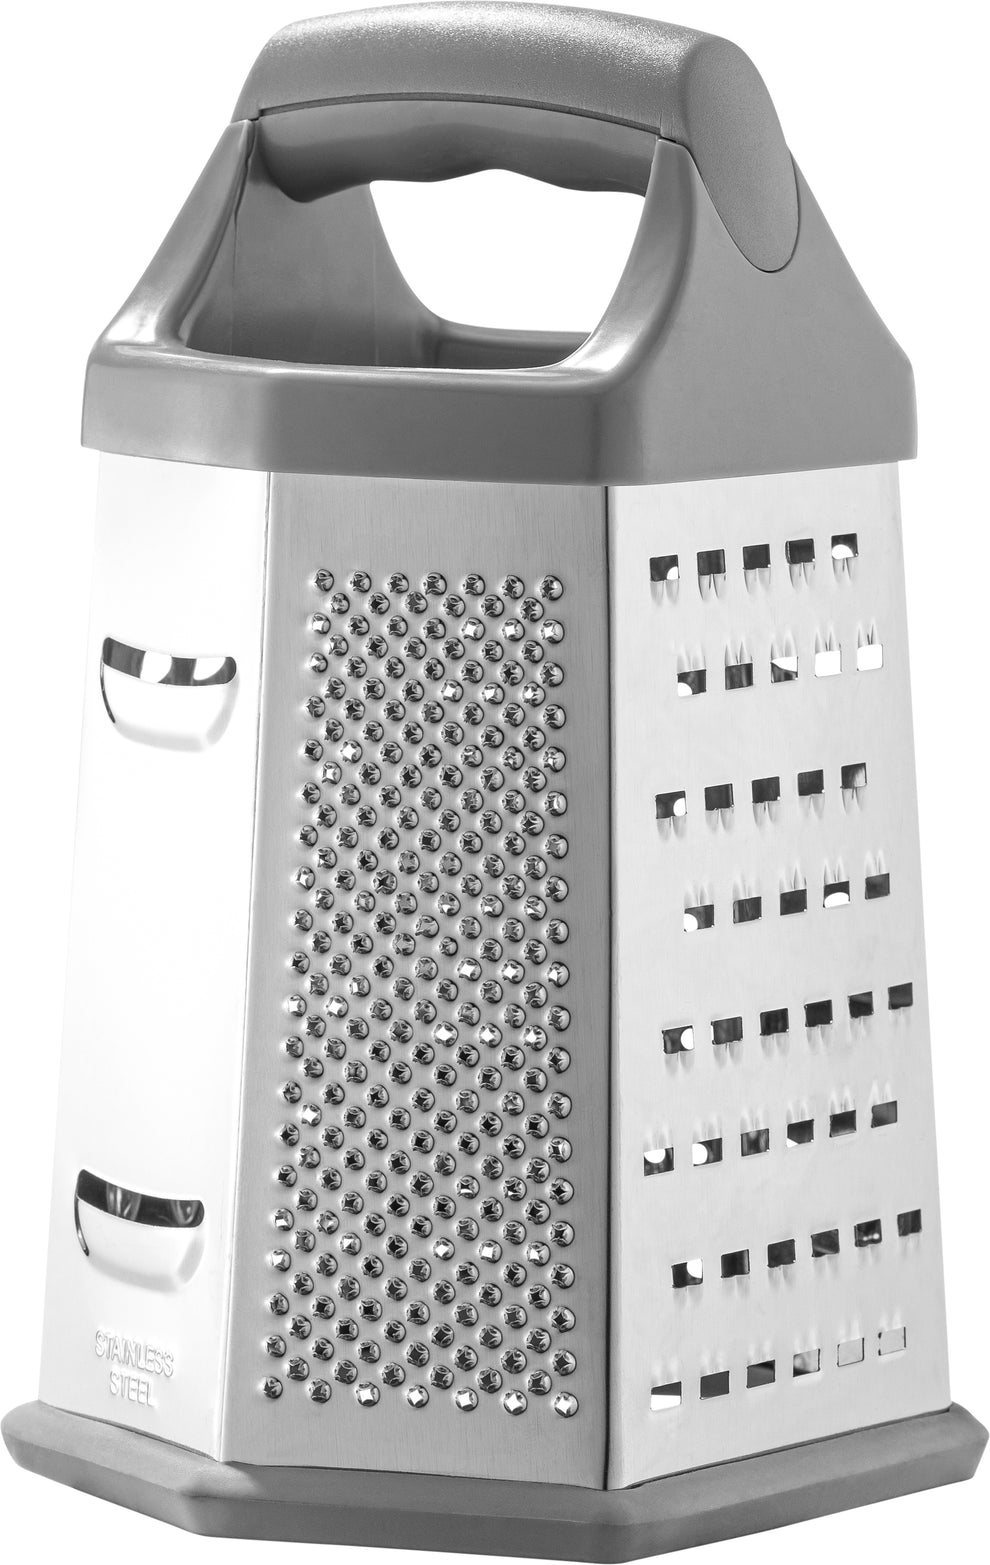 Edge Stainless Steel 6 Sided Grater with Silicone Non Skid Base and TPR Handles, Red, 72 Pack